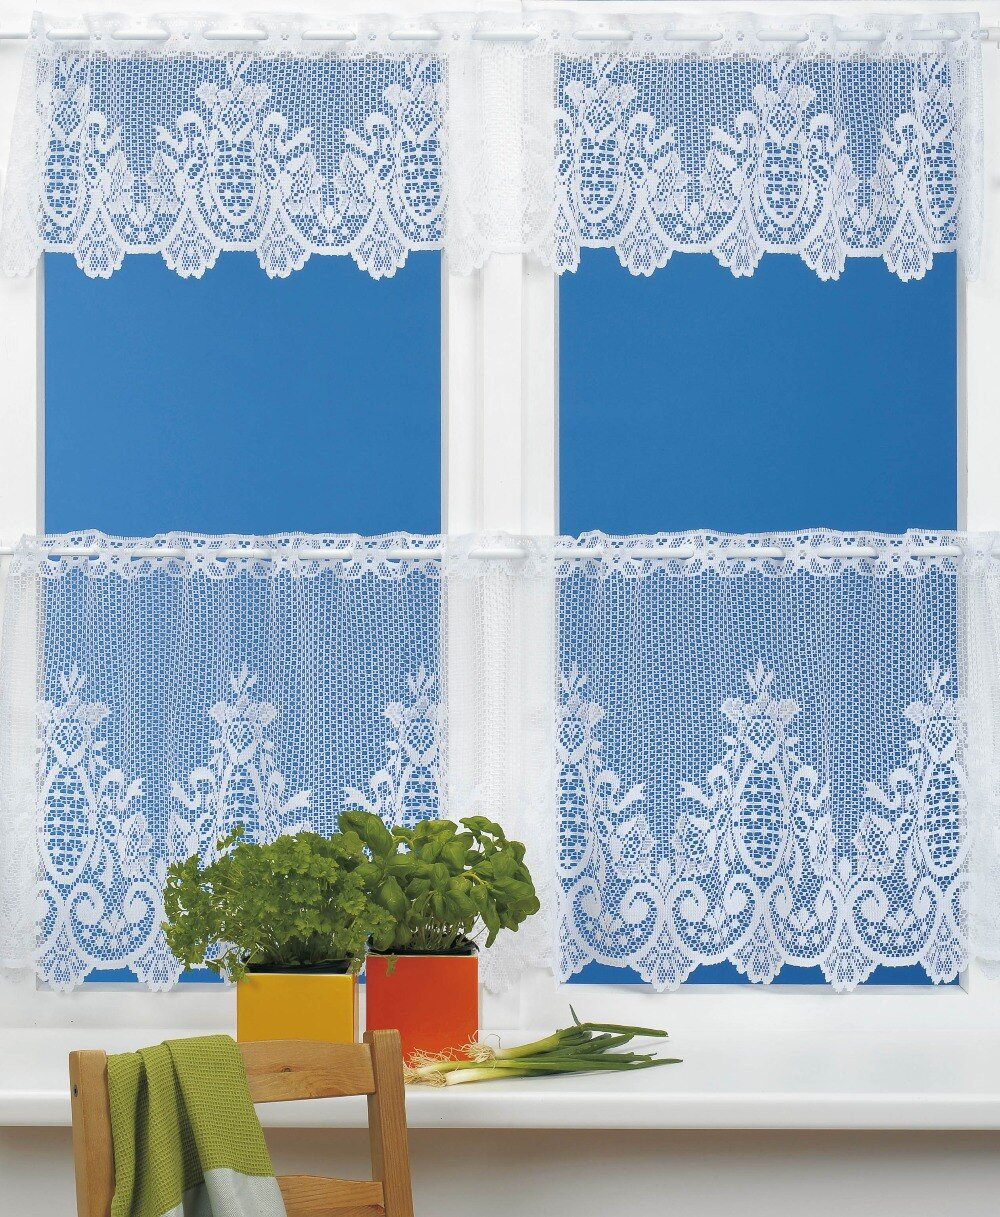 Lace Kitchen Curtain
 white lace kitchen cafe curtains for the kitchen country